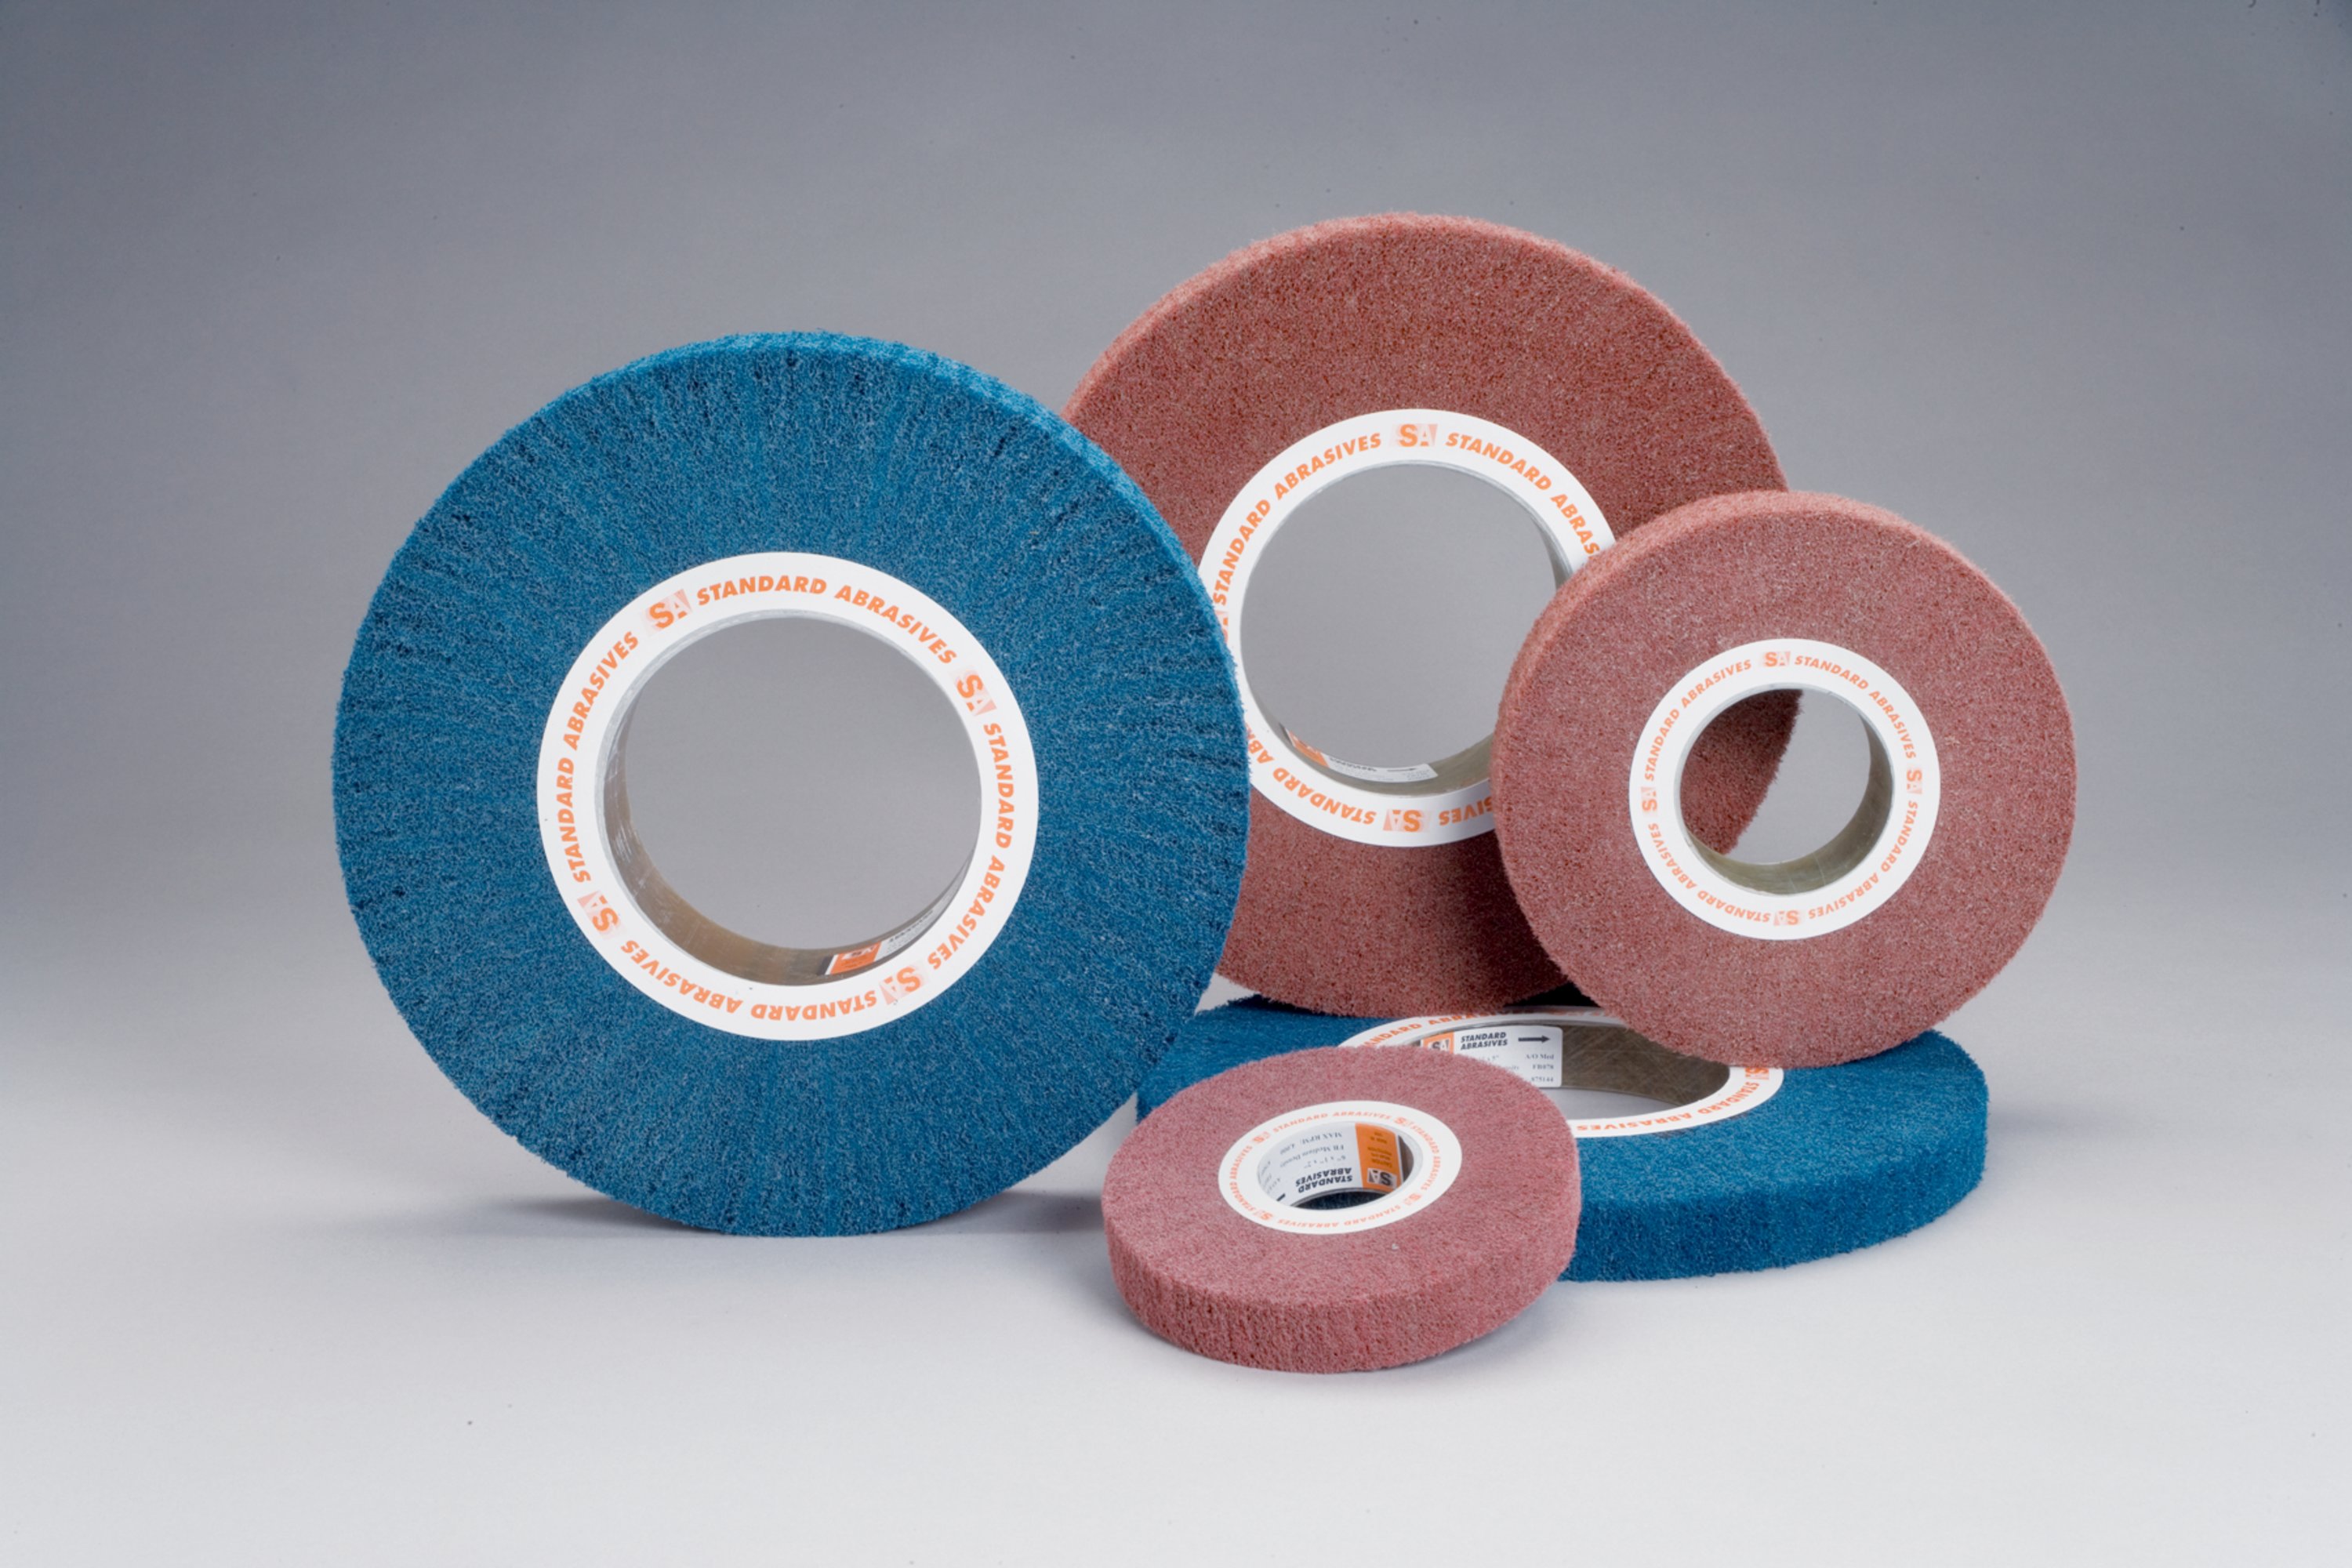 Our Buff and Blend High Strength products are made from tough, resin-reinforced nylon fiber with aluminum oxide abrasive grain